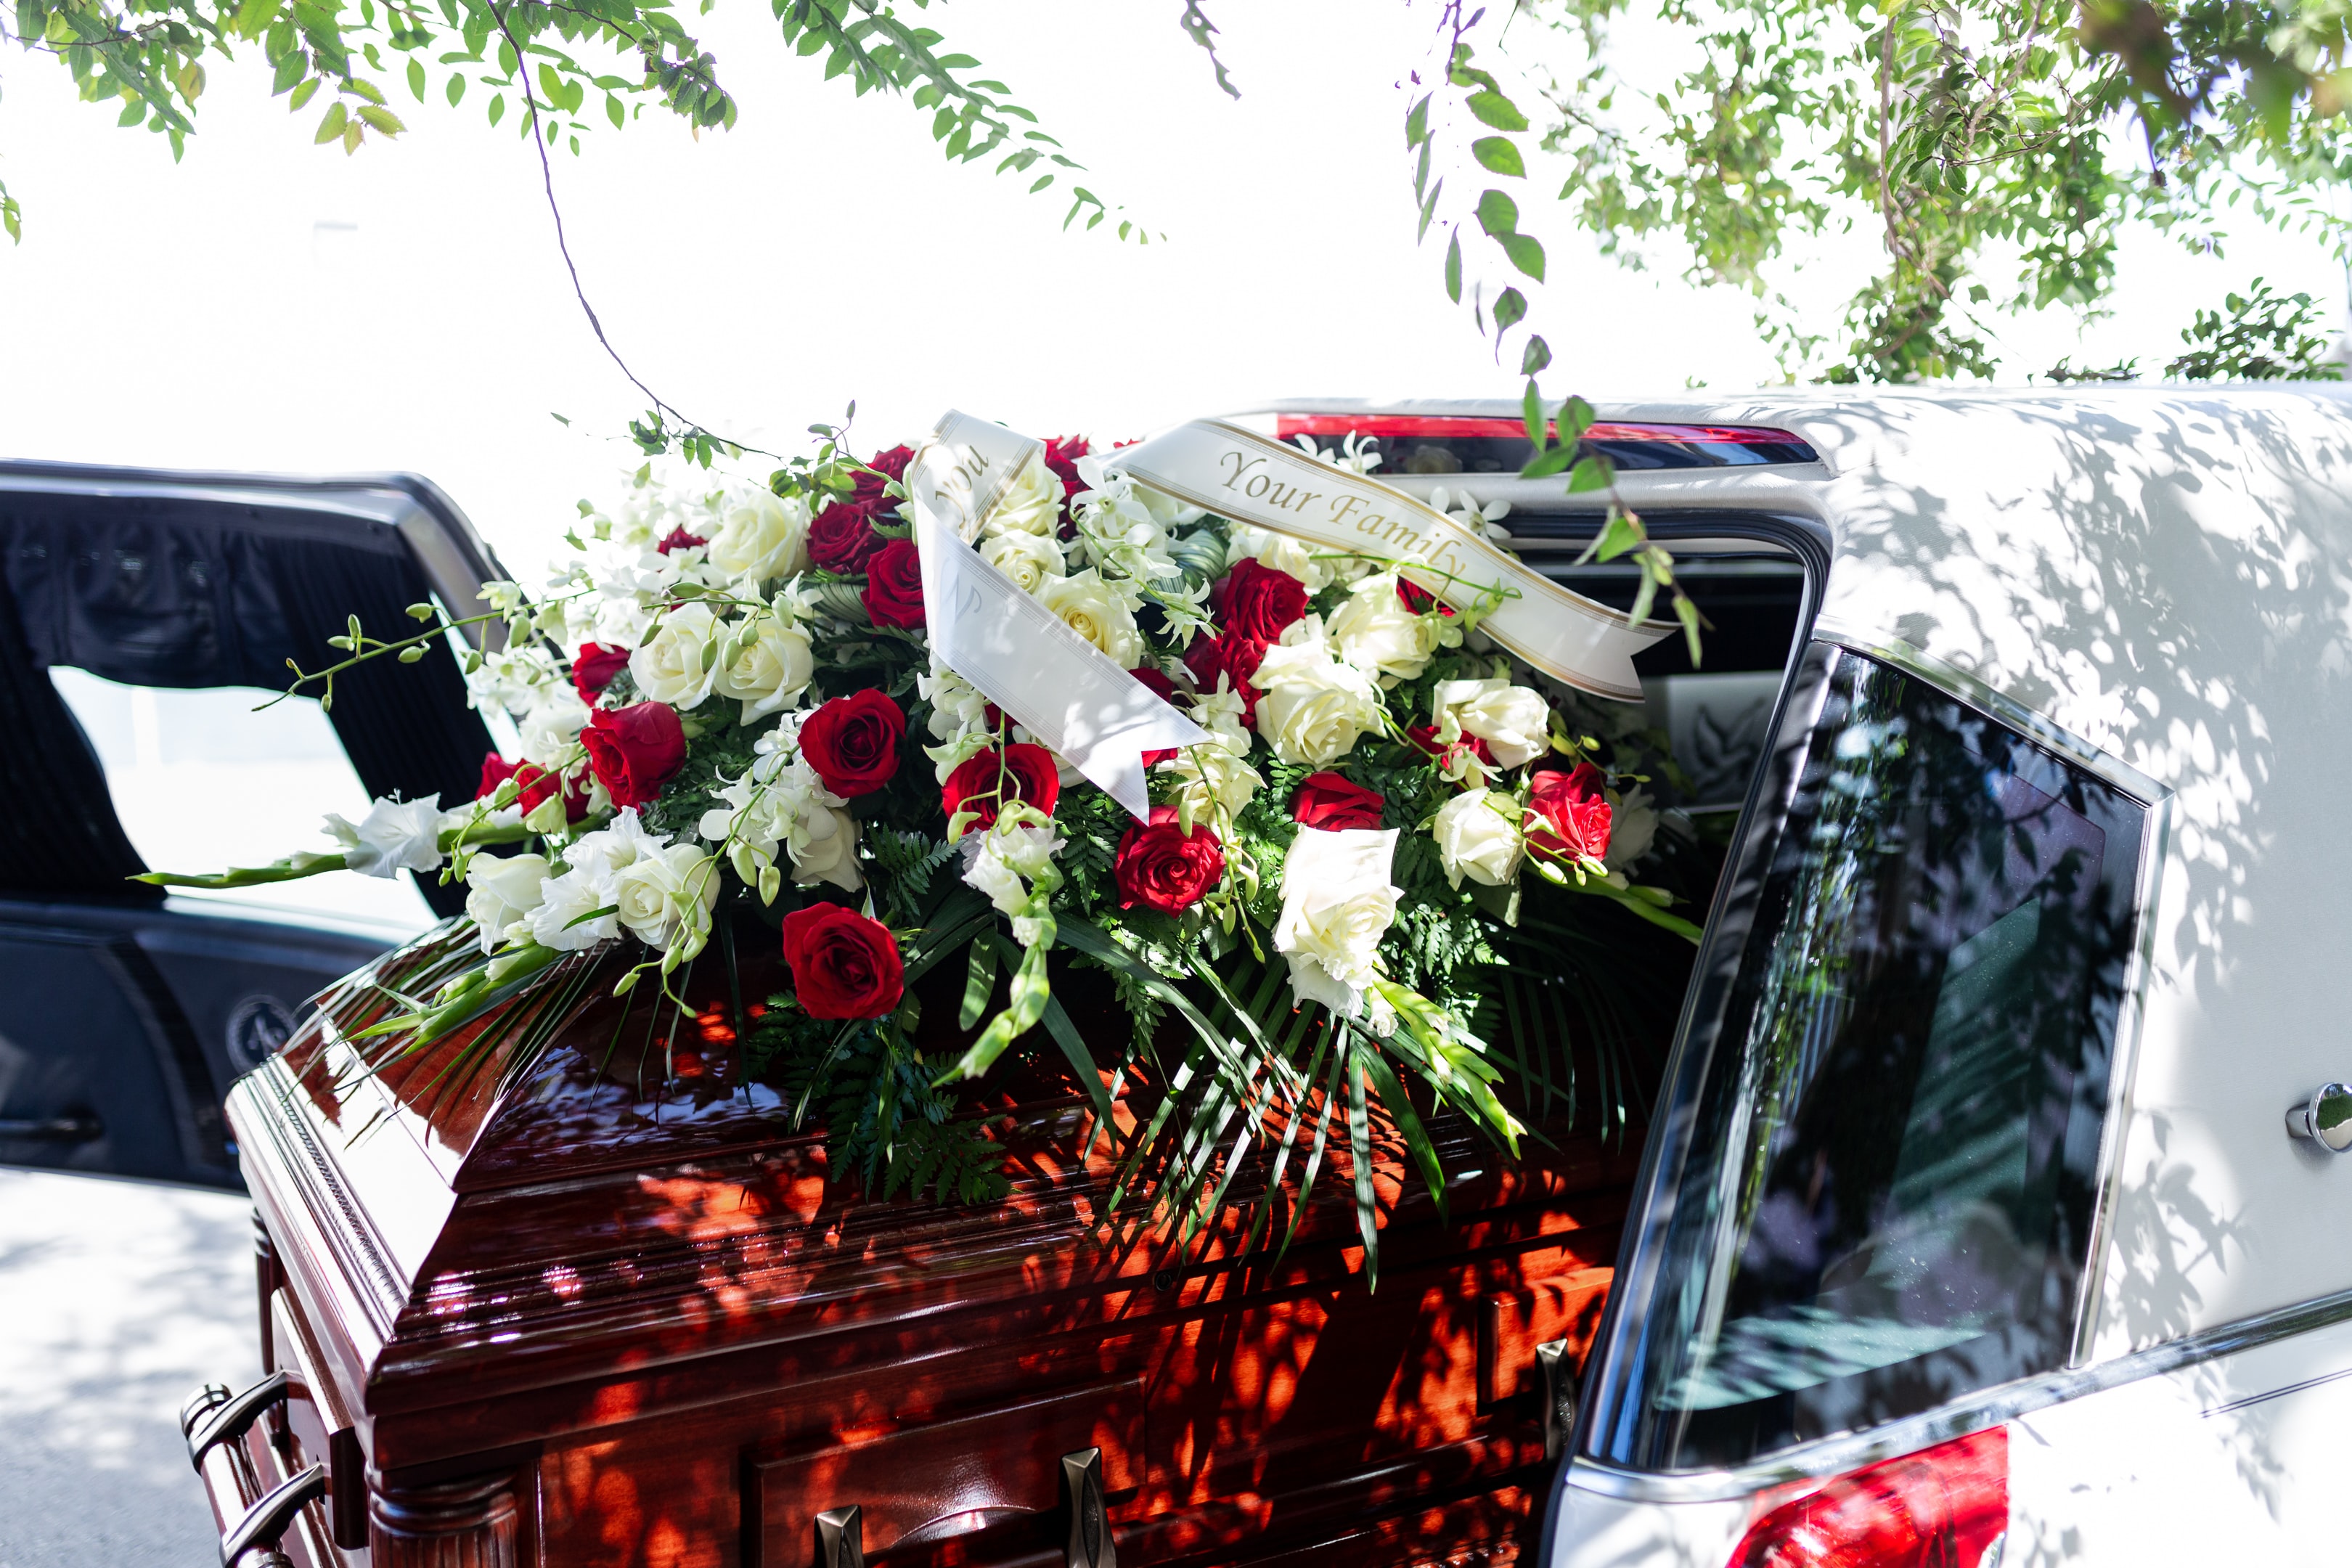 A hearse with a coffin partially in. The coffin is covered with red and white roses